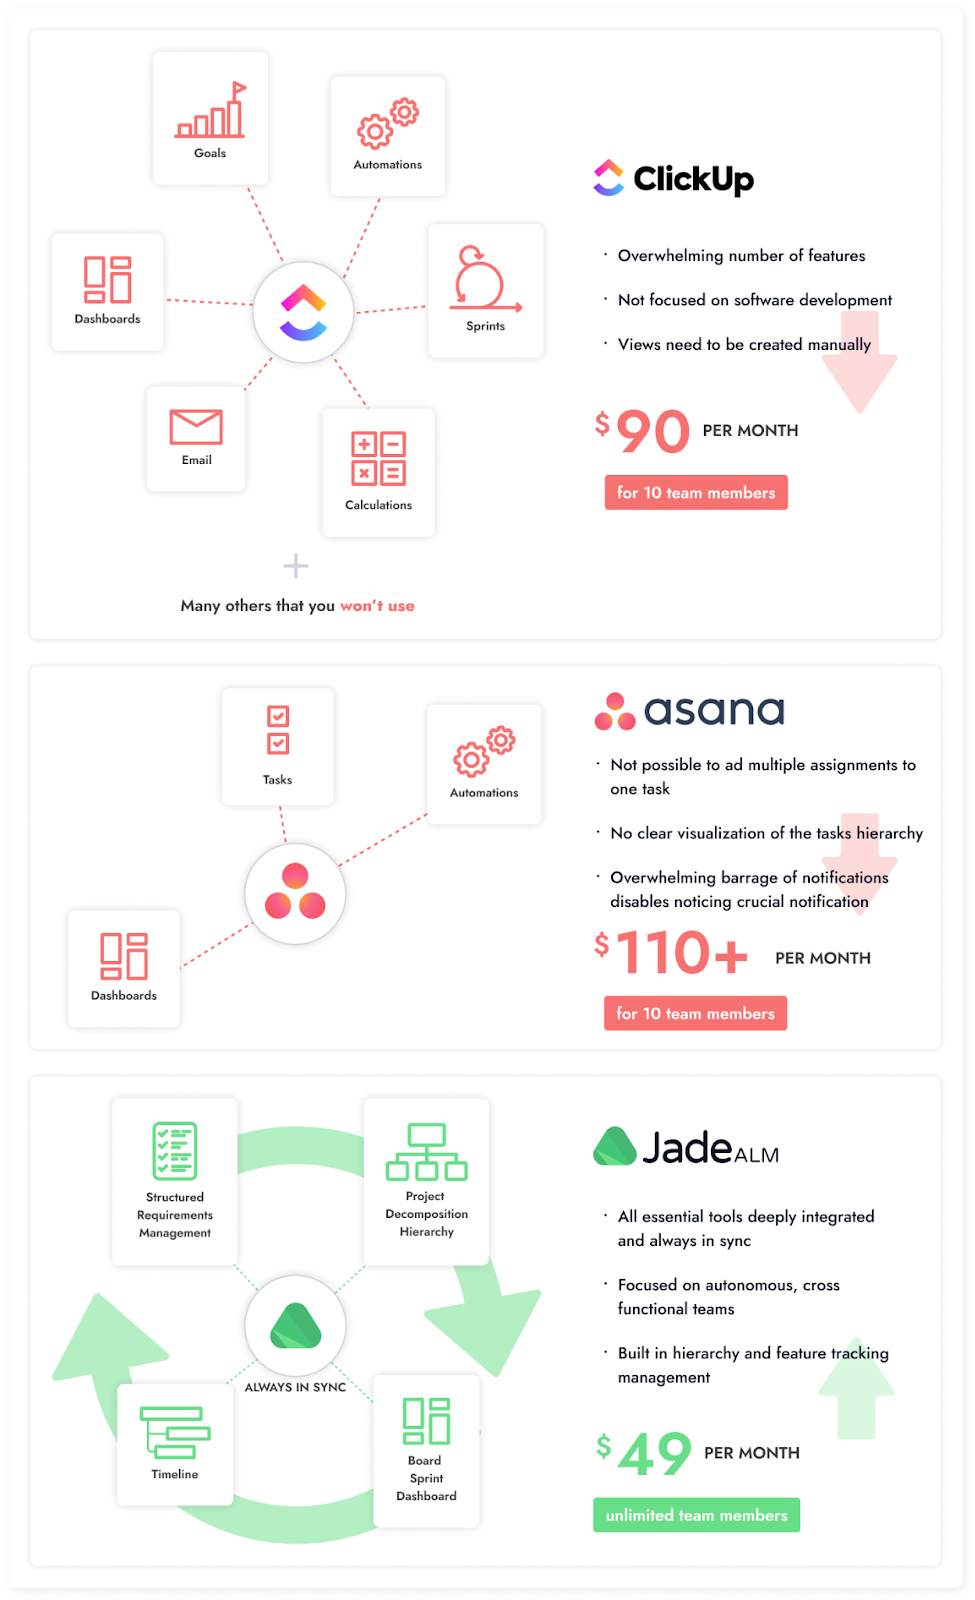 Asana vs ClickUp features and pricing